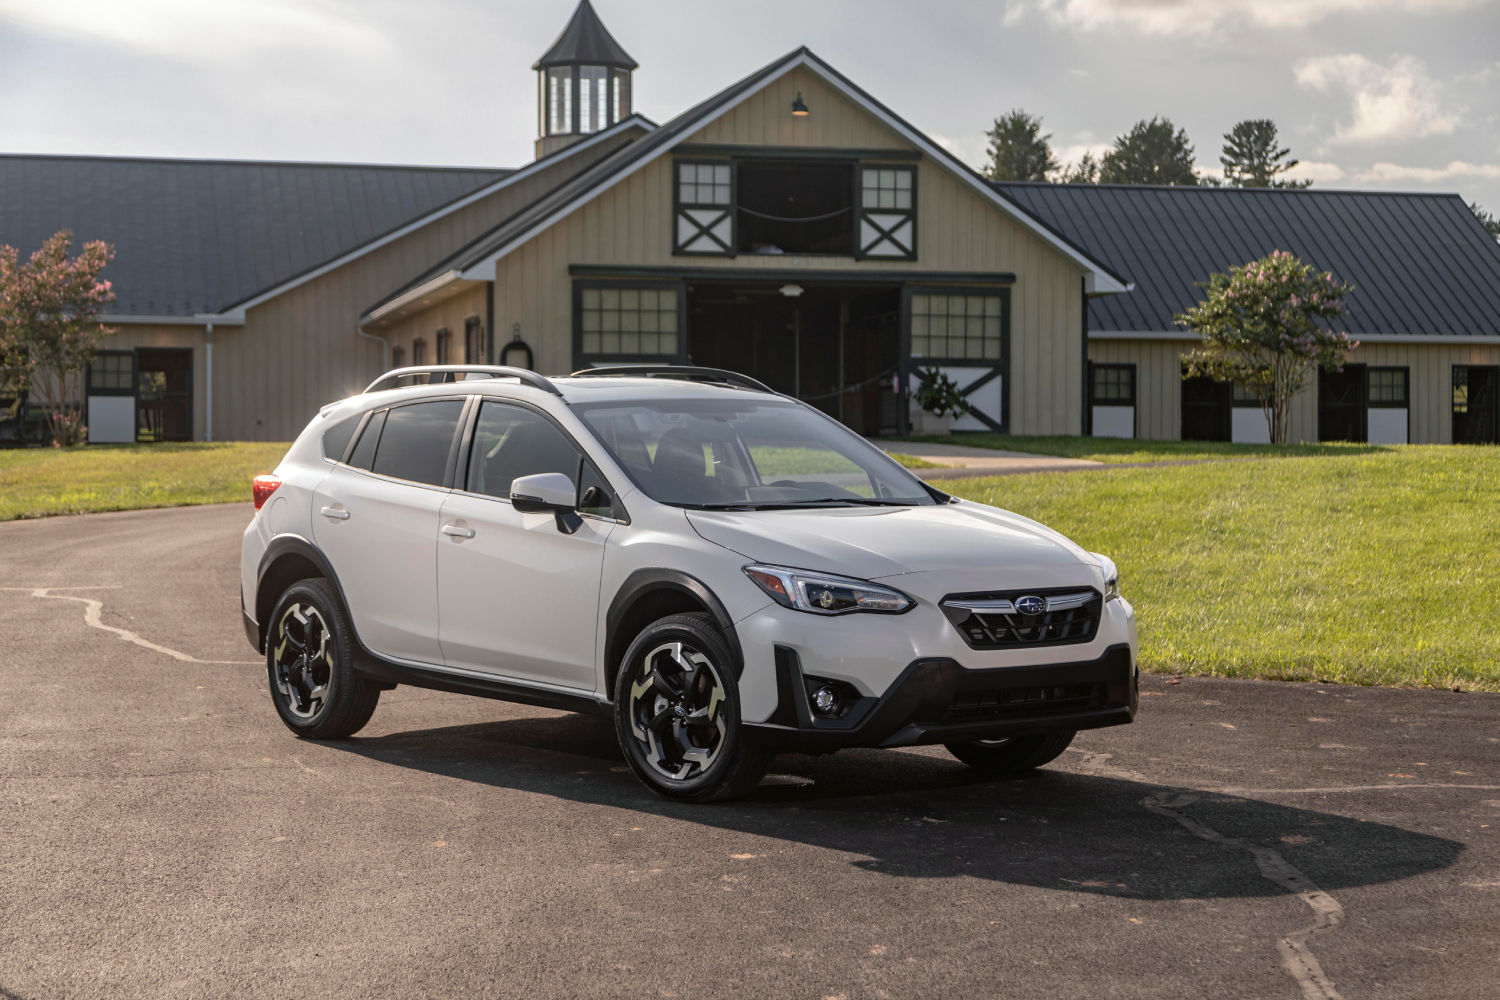 The best used Subaru Crosstrek SUV parked in front of a building